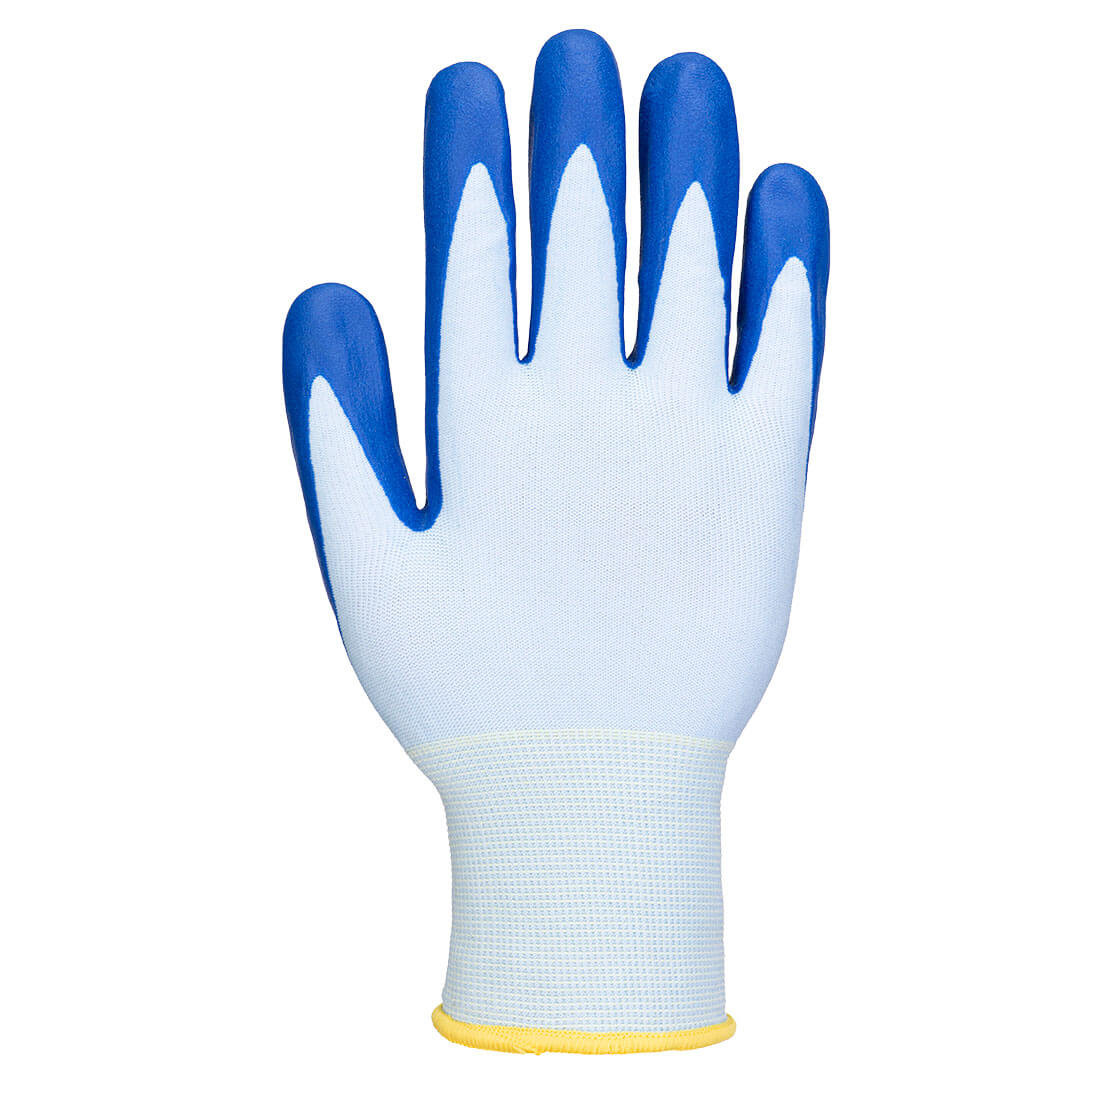 FD Grip 15 Nitrile Glove - Personal protection